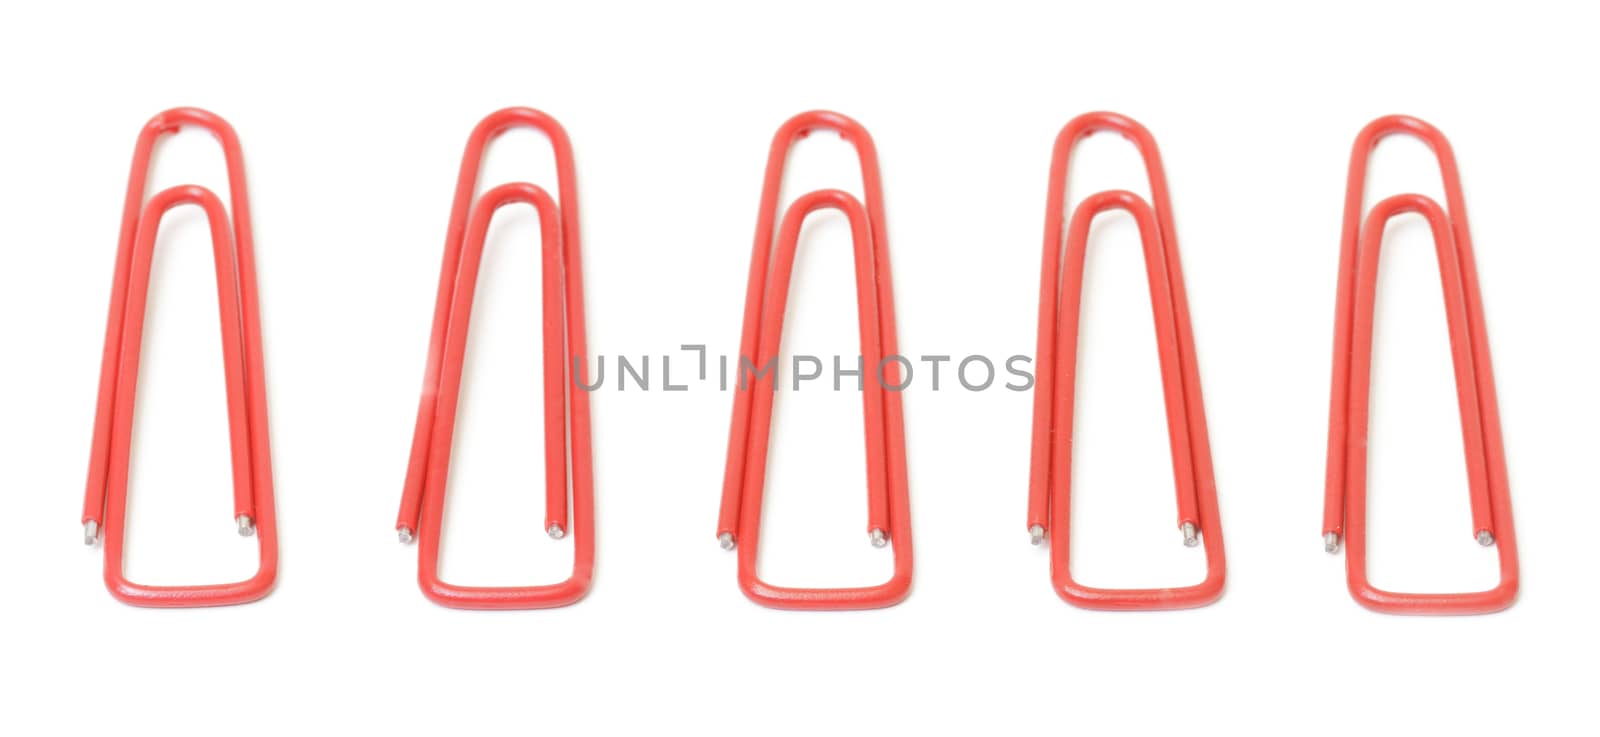 Red paper clips closeup on white